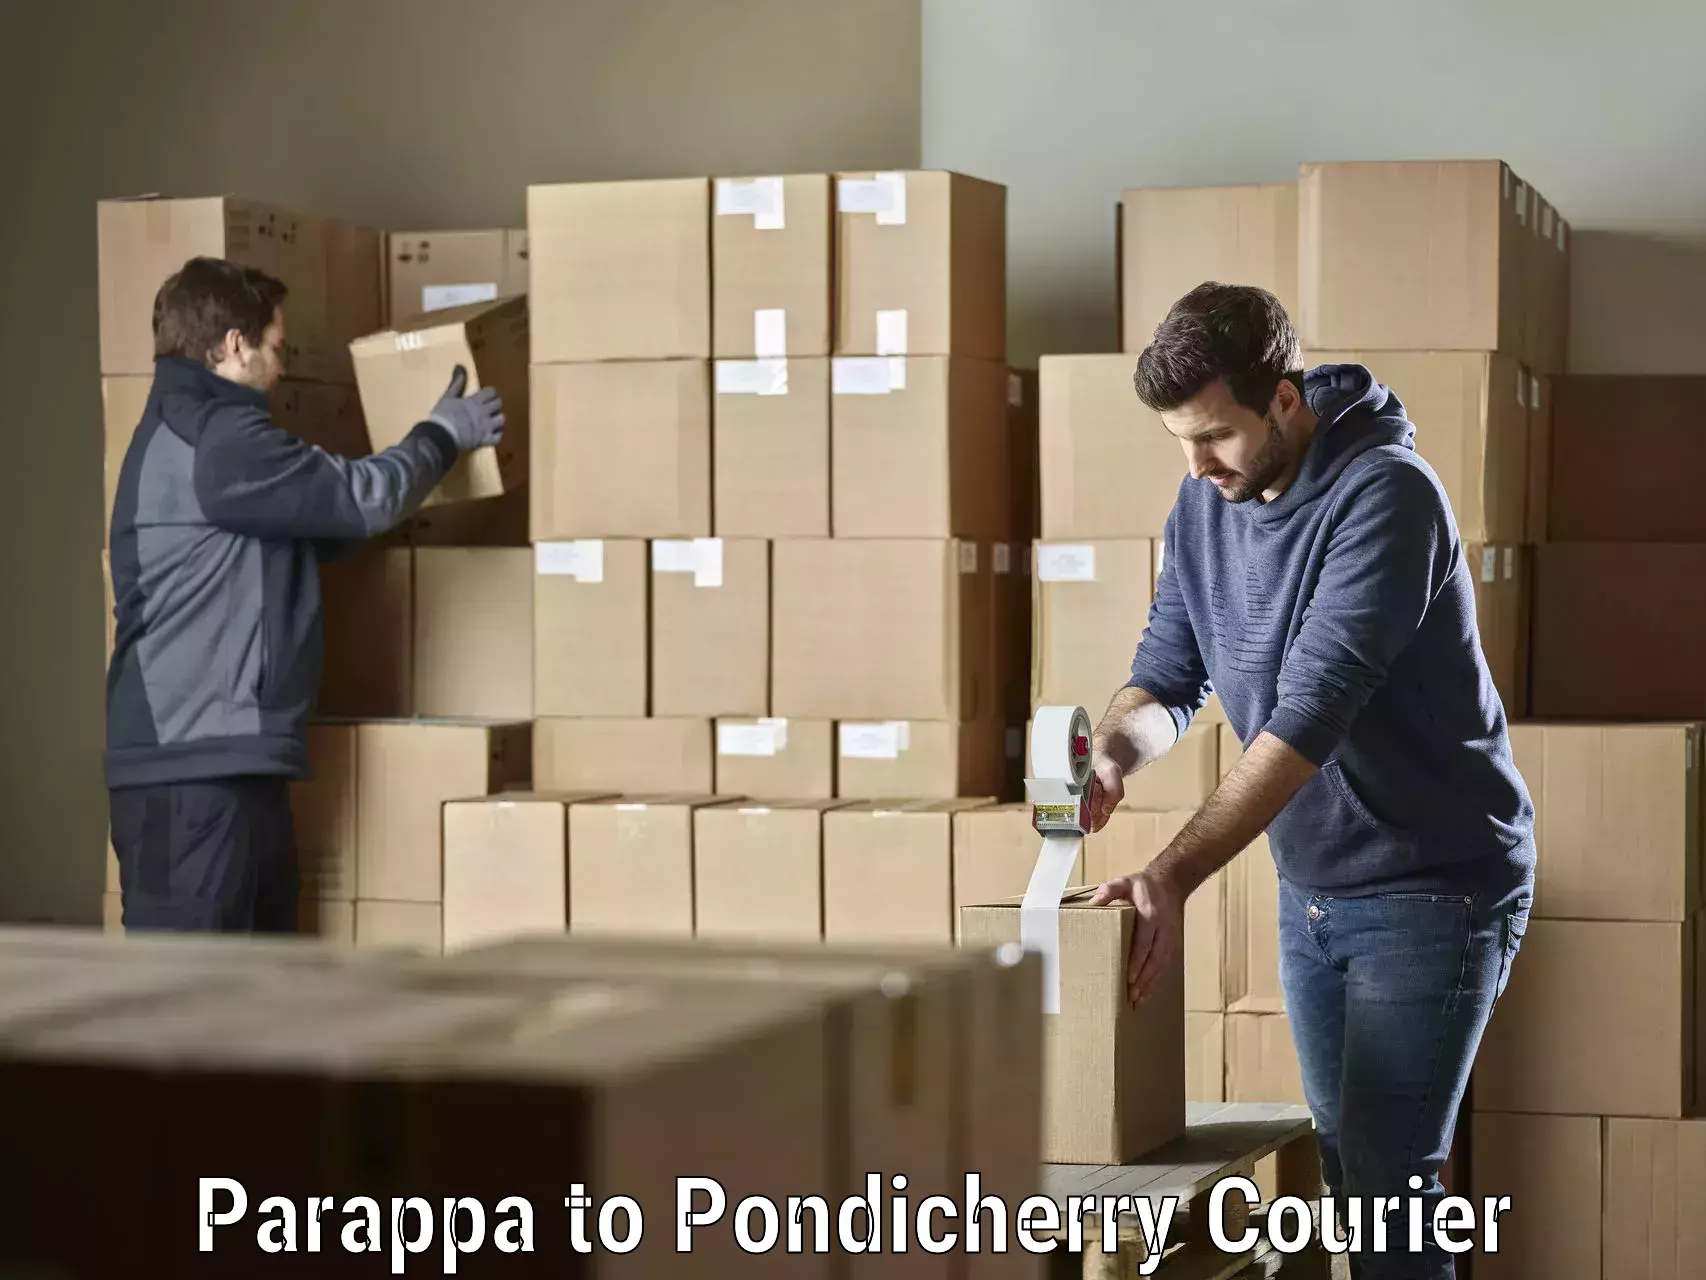 End-to-end delivery Parappa to Pondicherry